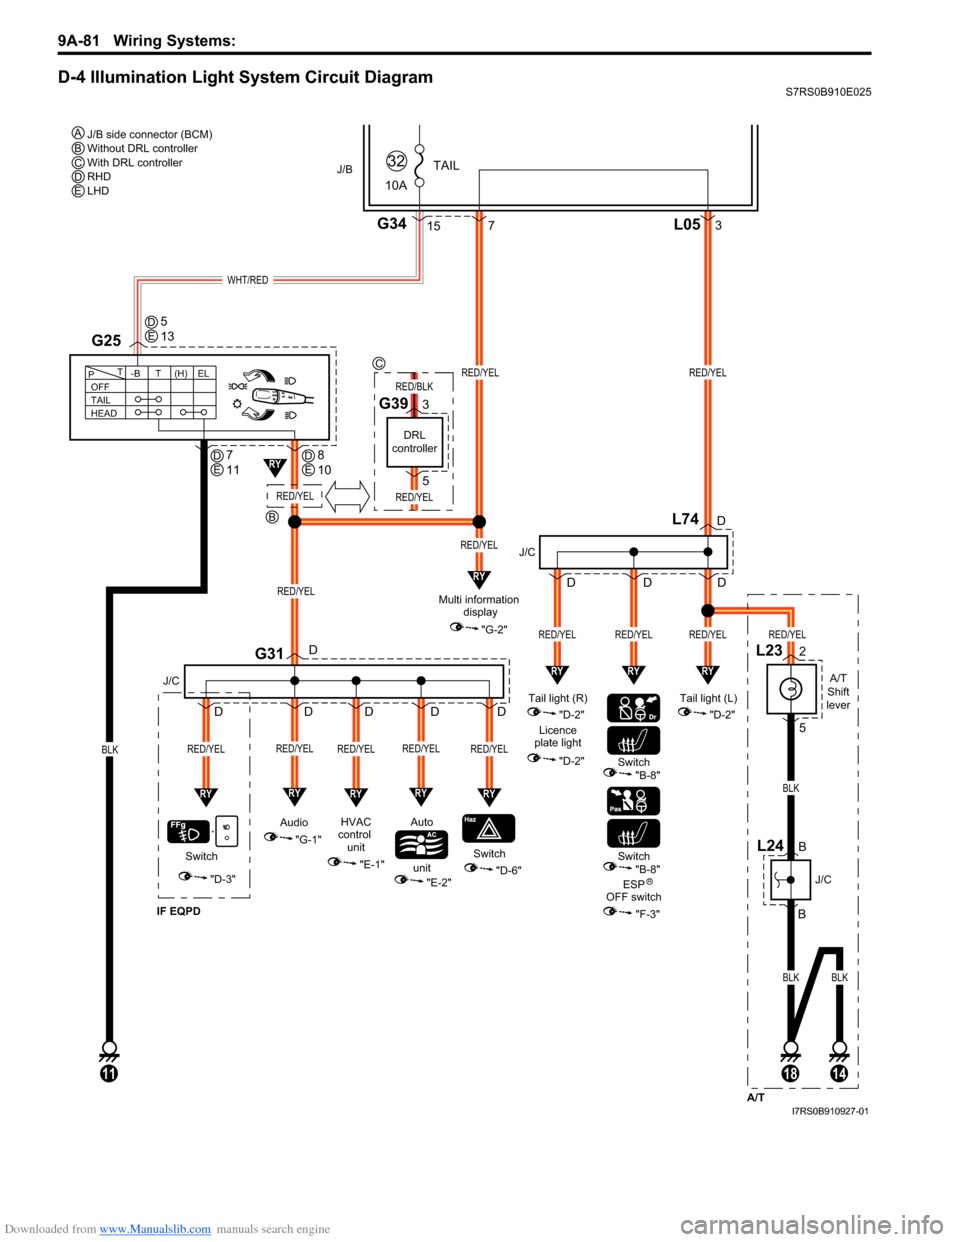 SUZUKI SWIFT 2005 2.G Service Manual Online Downloaded from www.Manualslib.com manuals search engine 9A-81 Wiring Systems: 
D-4 Illumination Light System Circuit DiagramS7RS0B910E025
WHT/RED
A/T
Shift
lever
L23
L742
5
BLK
BLKBLK
10A
TAIL
32J/B
